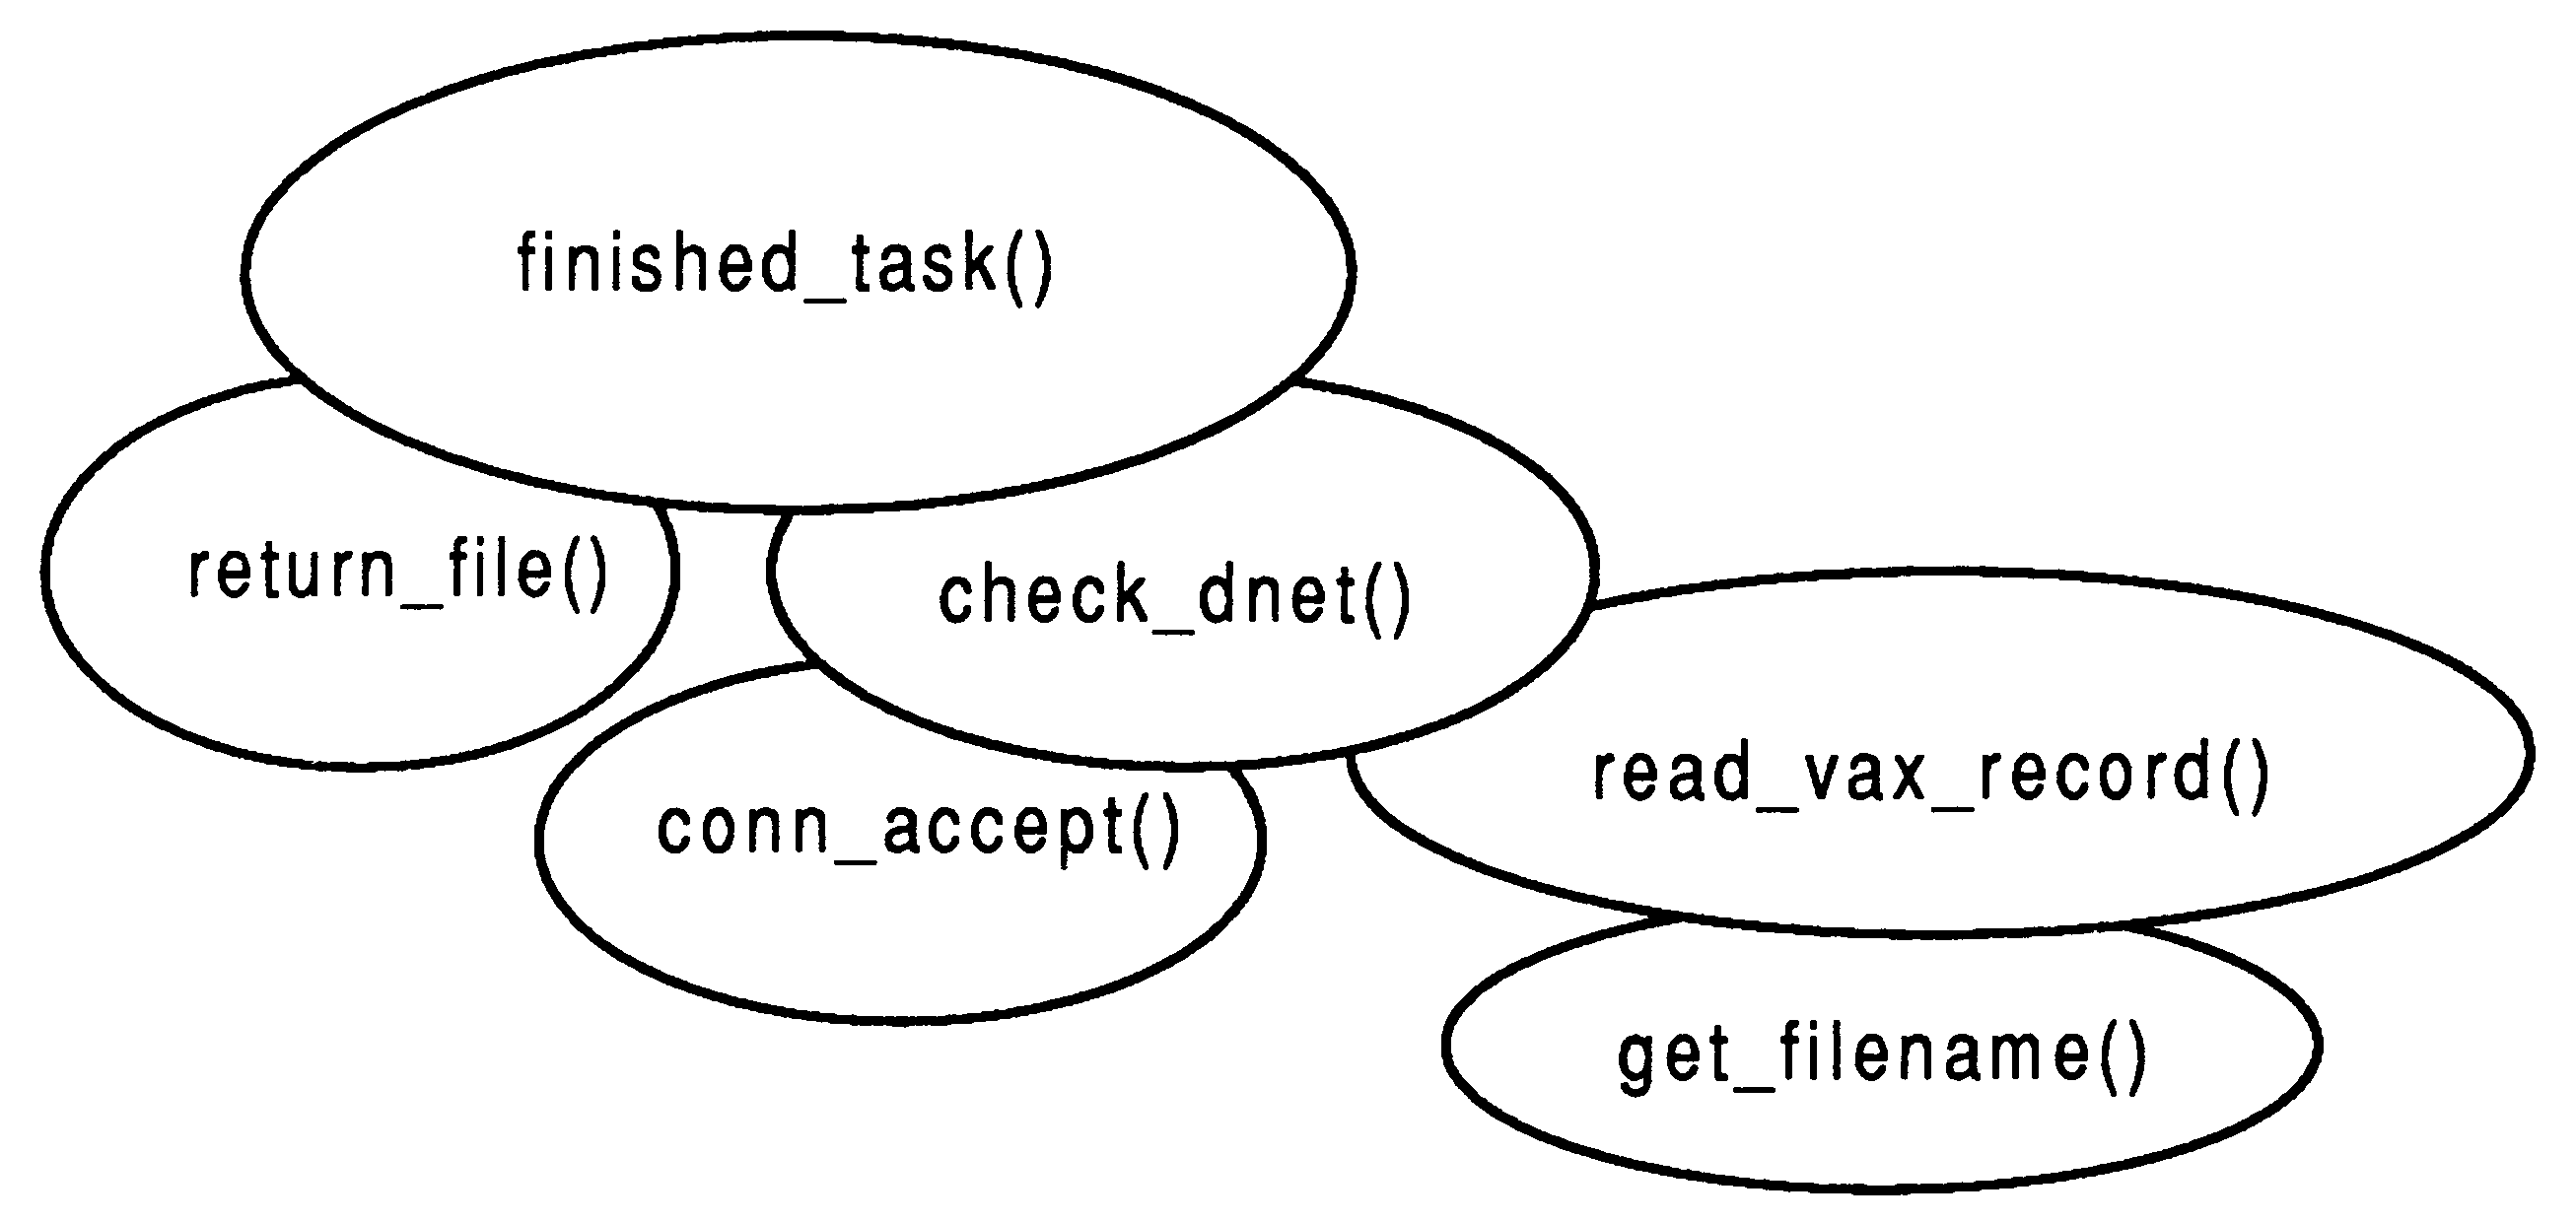 The
FINISHEDTASK_CMD function hierarchy